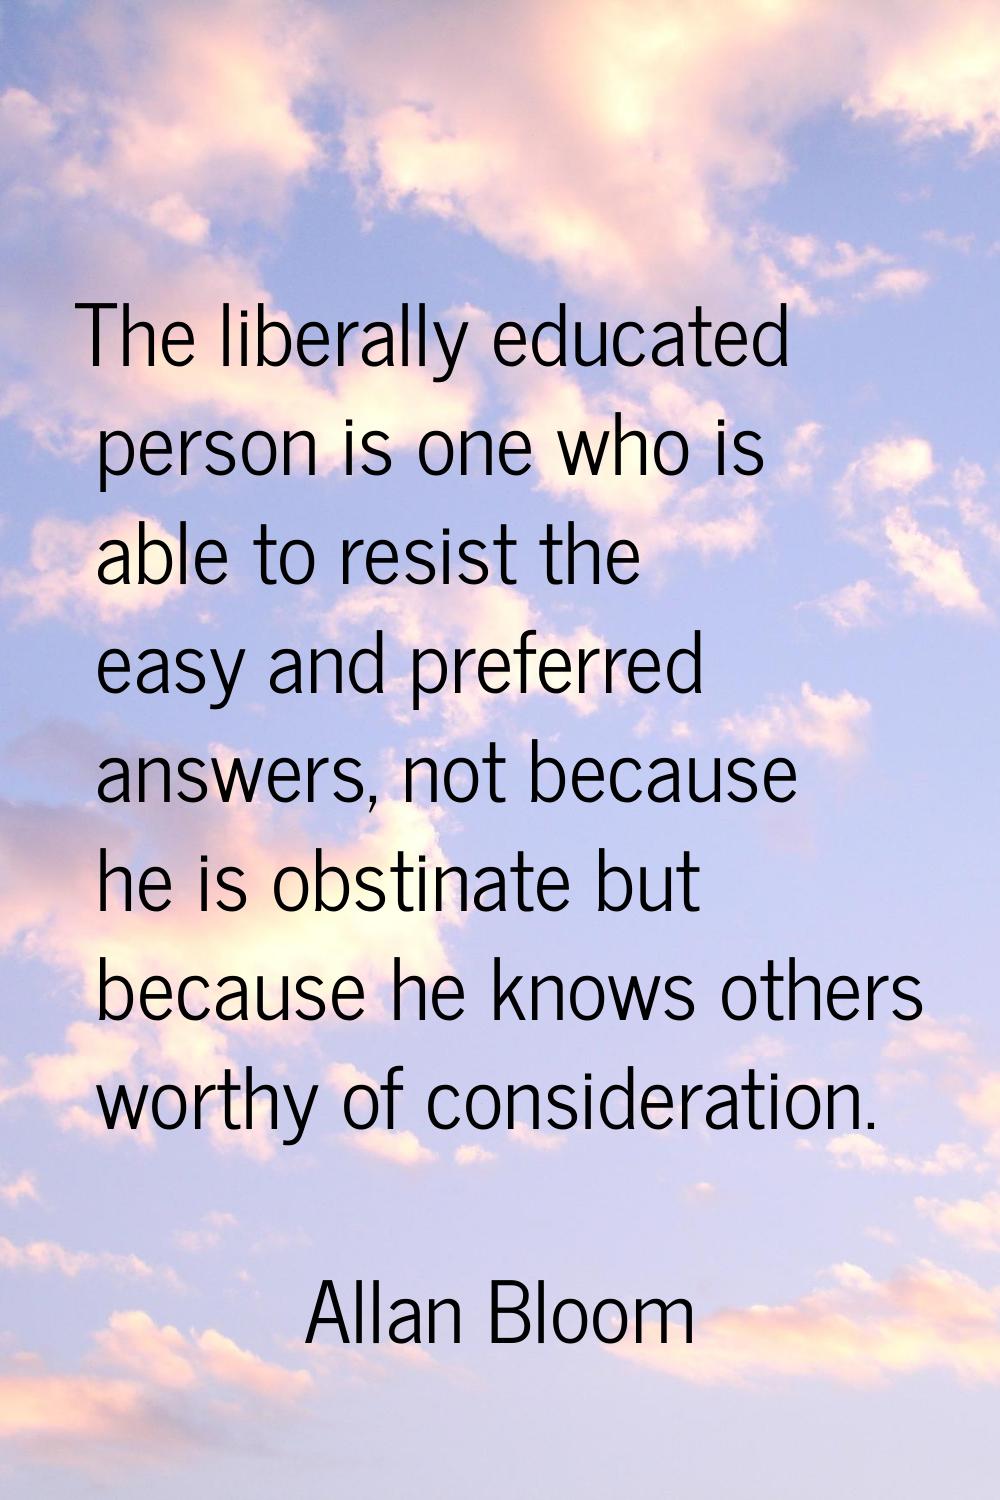 The liberally educated person is one who is able to resist the easy and preferred answers, not beca